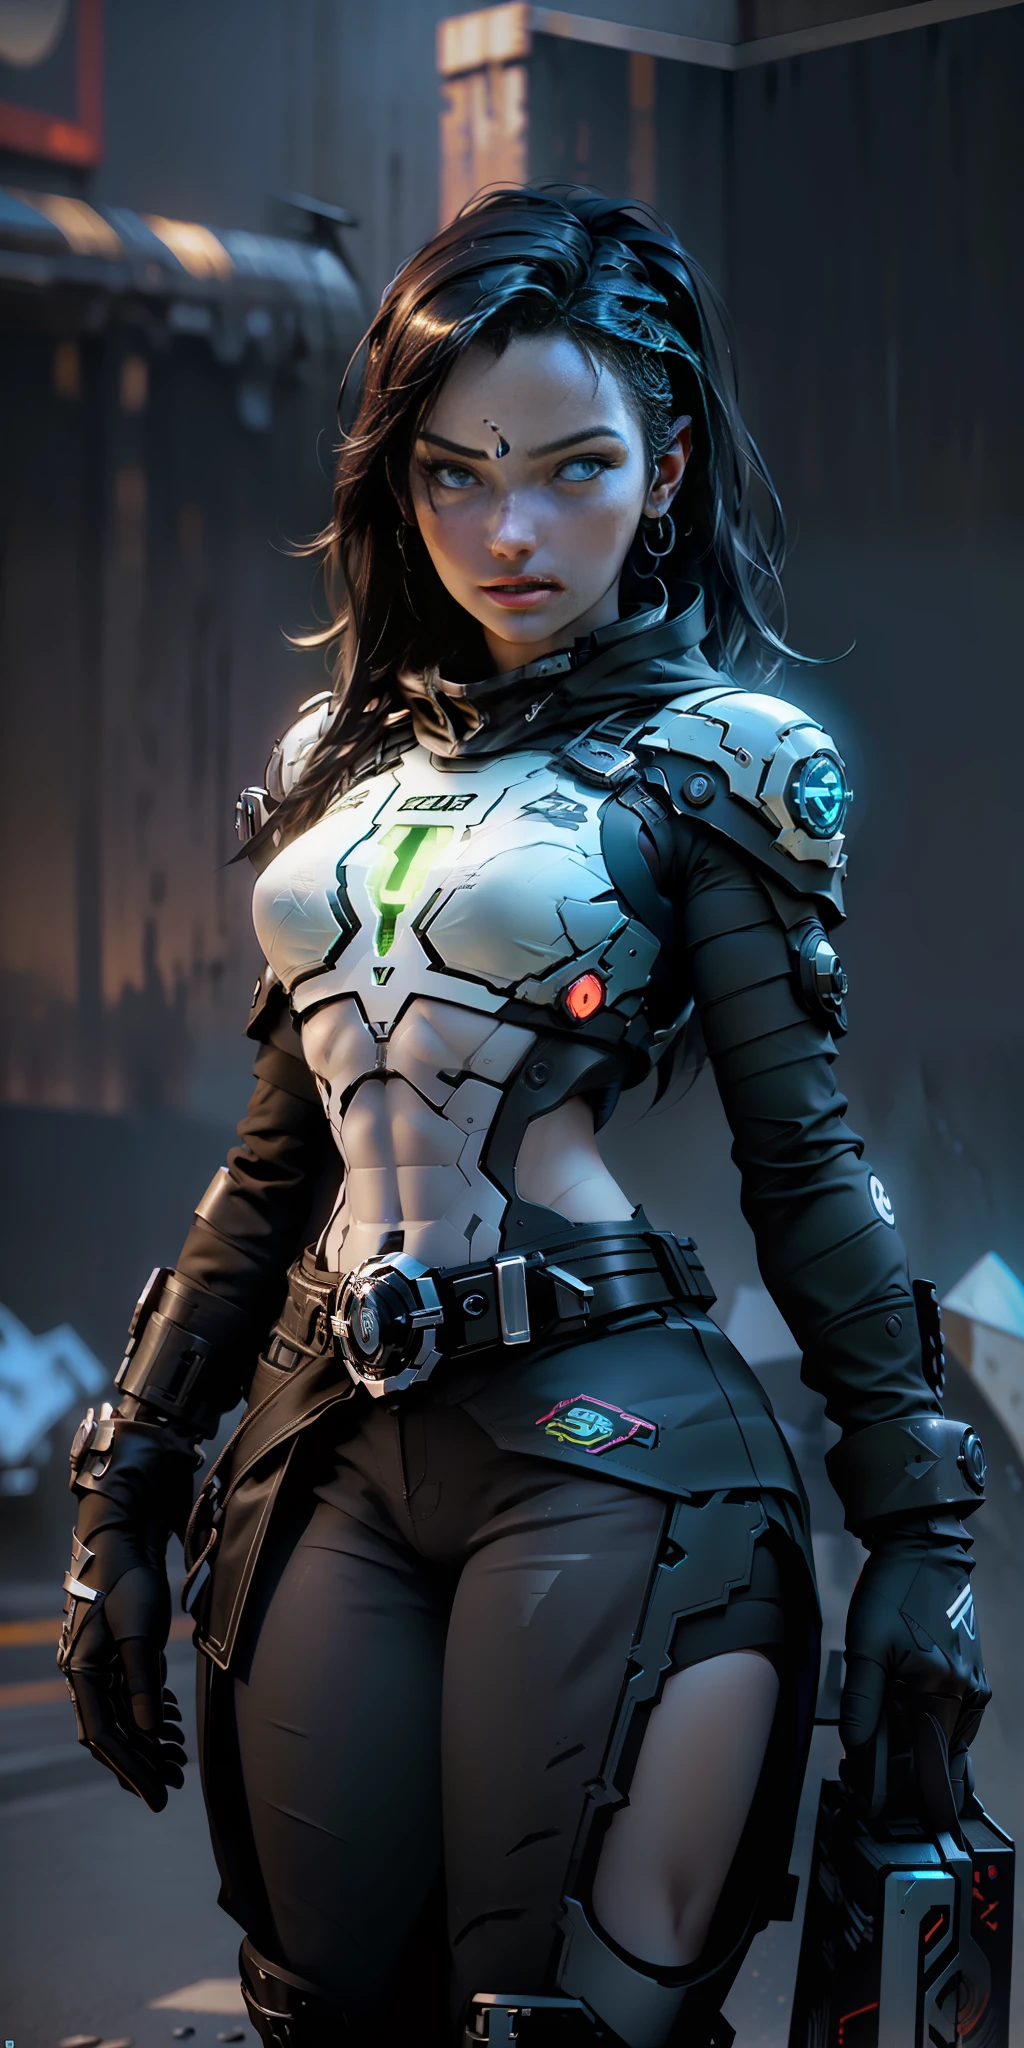 ((Best quality)), ((masterpiece)), (detailed: 1.4), 3D, an image of a beautiful cyberpunk girl with athletic body, HDR (High Dynamic Range), Ray Tracing, NVIDIA RTX, Super-Resolution, Unreal 5, Subsurface Scattering, PBR Texturing, Post-processing, Anisotropic filtering, Depth of field, Maximum clarity and sharpness, Multilayer textures, Albedo and specular maps, Surface shading, Accurate simulation of light-material interaction, Perfect proportions,  Octane Render, Two-tone lighting, wide aperture, low ISO, white balance, rule of thirds, 8K RAW, CircuitBoardAI,